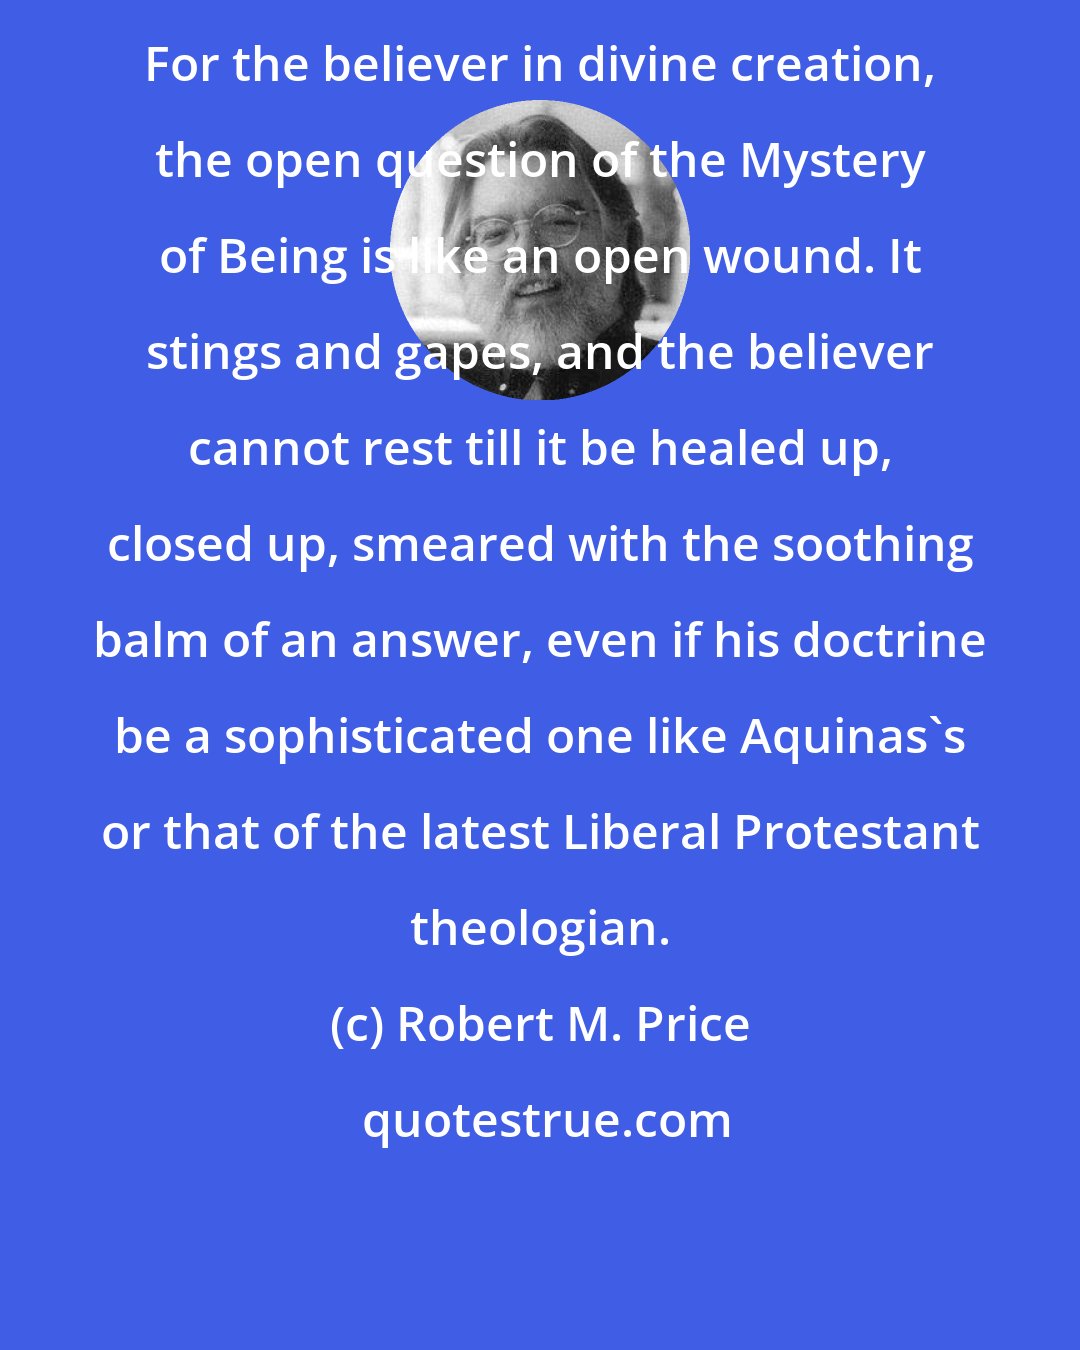 Robert M. Price: For the believer in divine creation, the open question of the Mystery of Being is like an open wound. It stings and gapes, and the believer cannot rest till it be healed up, closed up, smeared with the soothing balm of an answer, even if his doctrine be a sophisticated one like Aquinas's or that of the latest Liberal Protestant theologian.